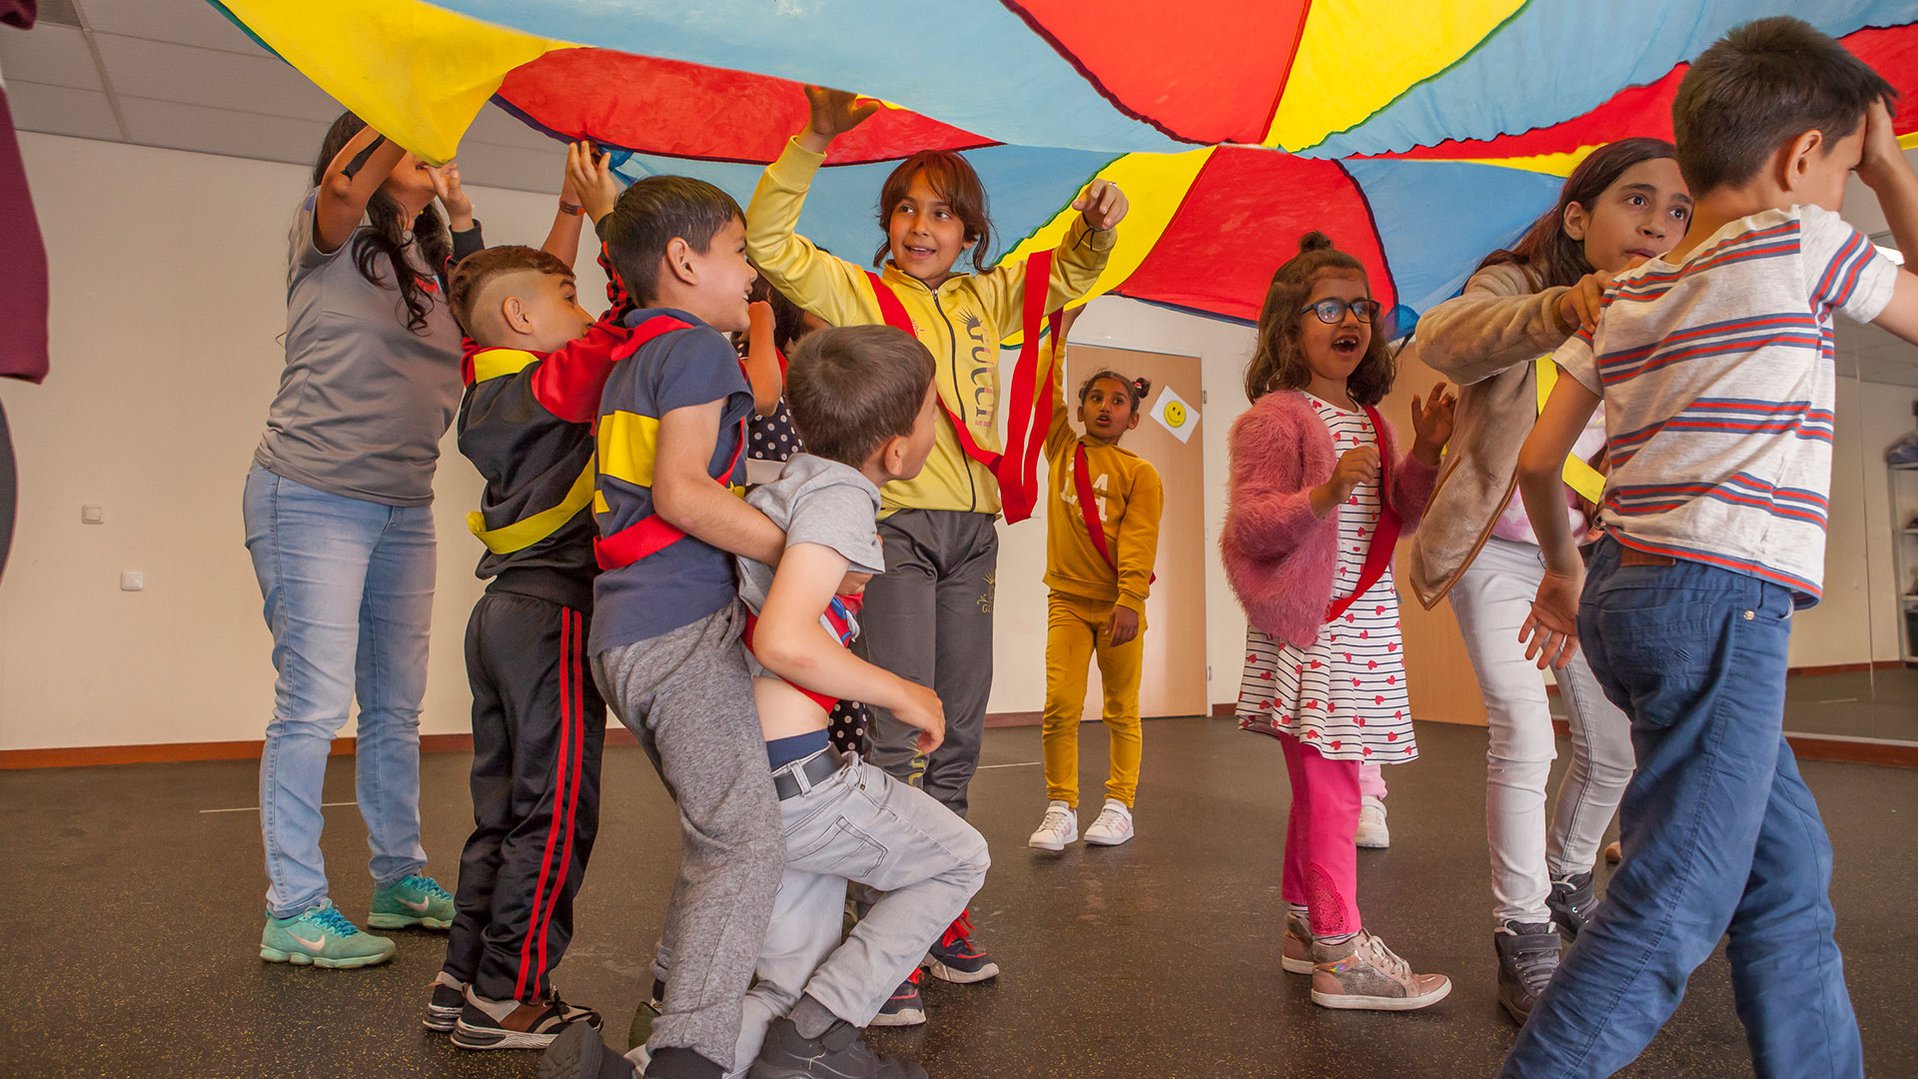 Refugee children playing with parachute during a TeamUp session at an asylum in the Netherlands